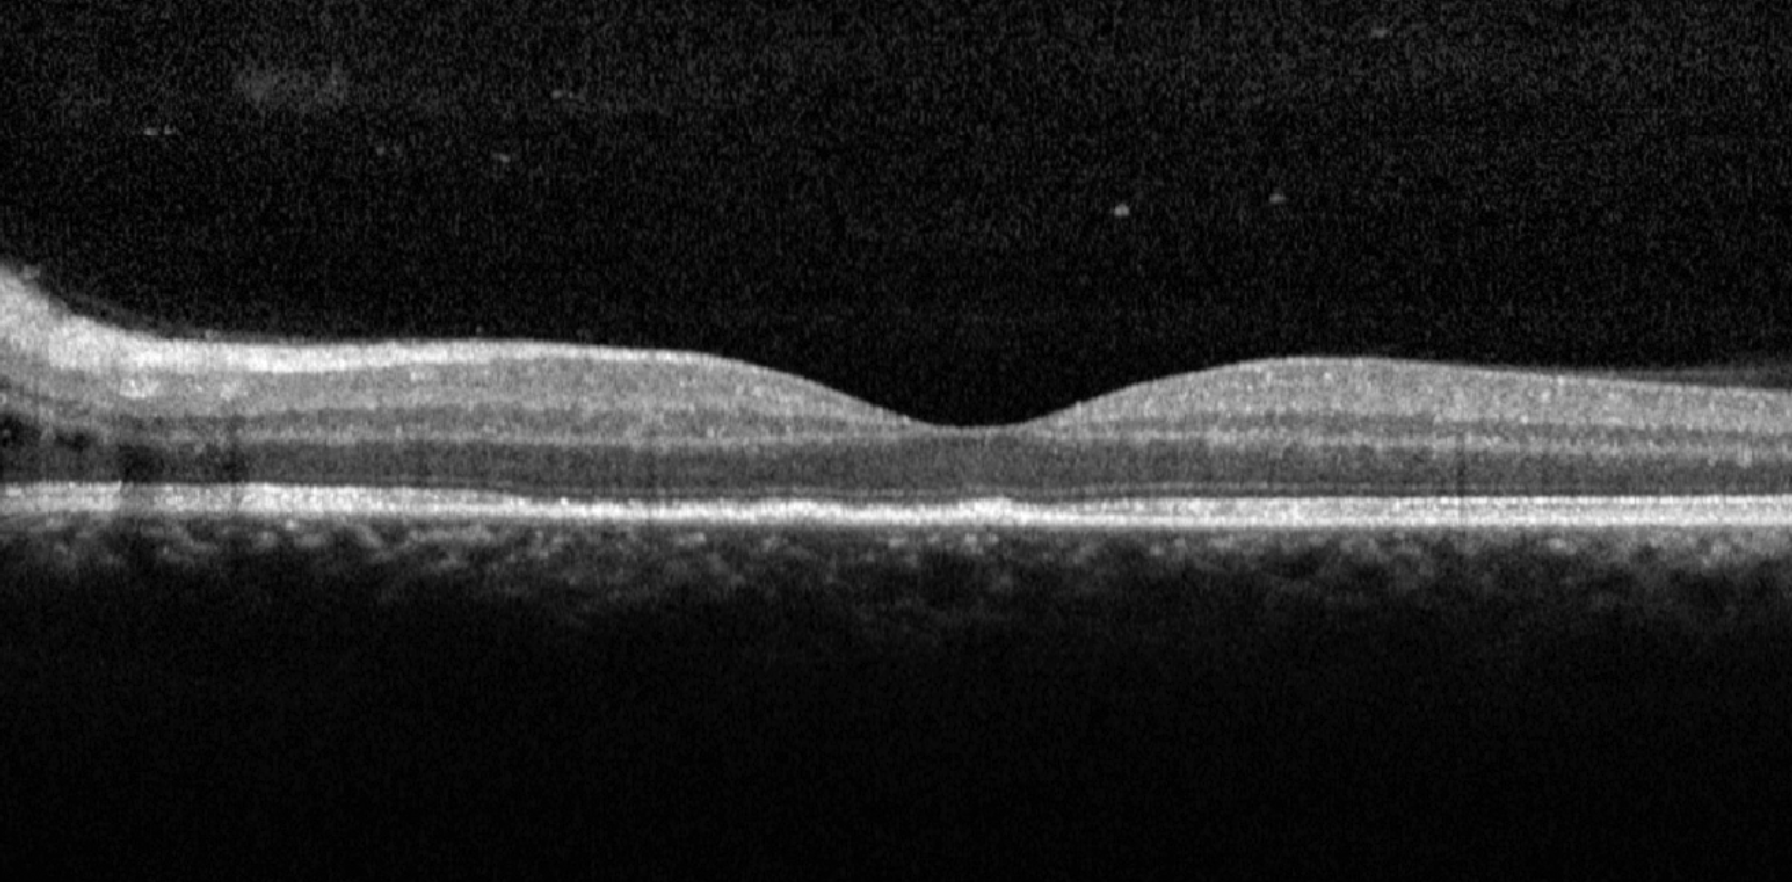 Fig. 4. OCT of the macula of the left eye showing loss of ellipsoid zone and intraretinal edema adjacent to the optic nerve.